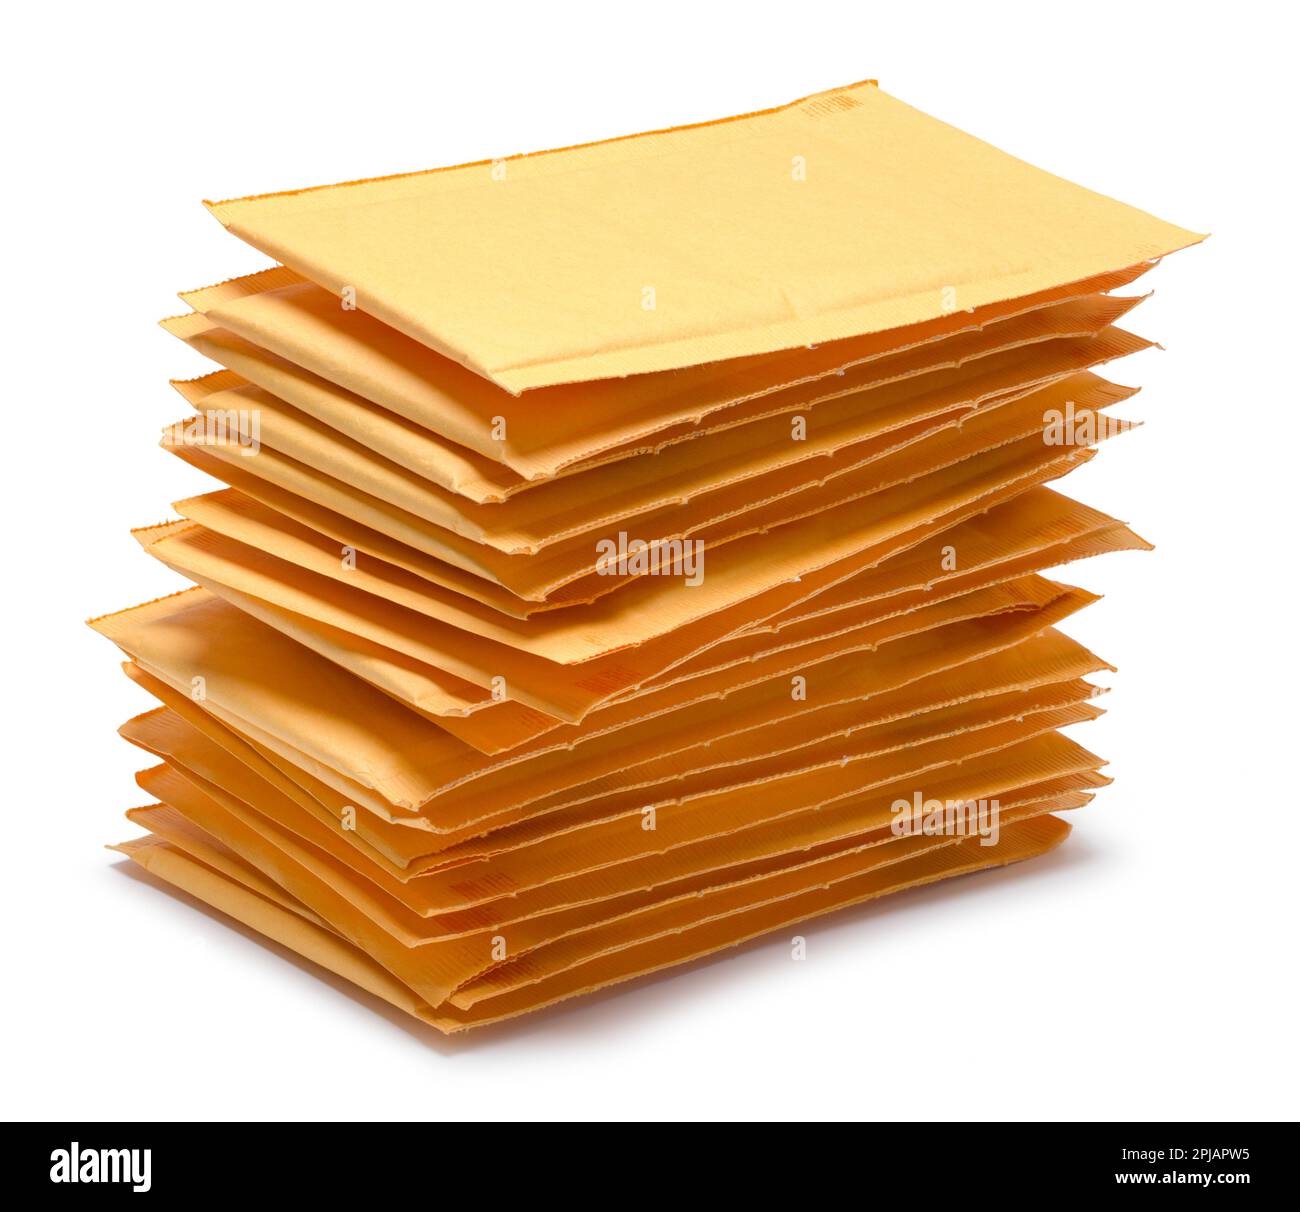 Pile of Yellow Padded Envvelopes Cut Out on White. Stock Photo